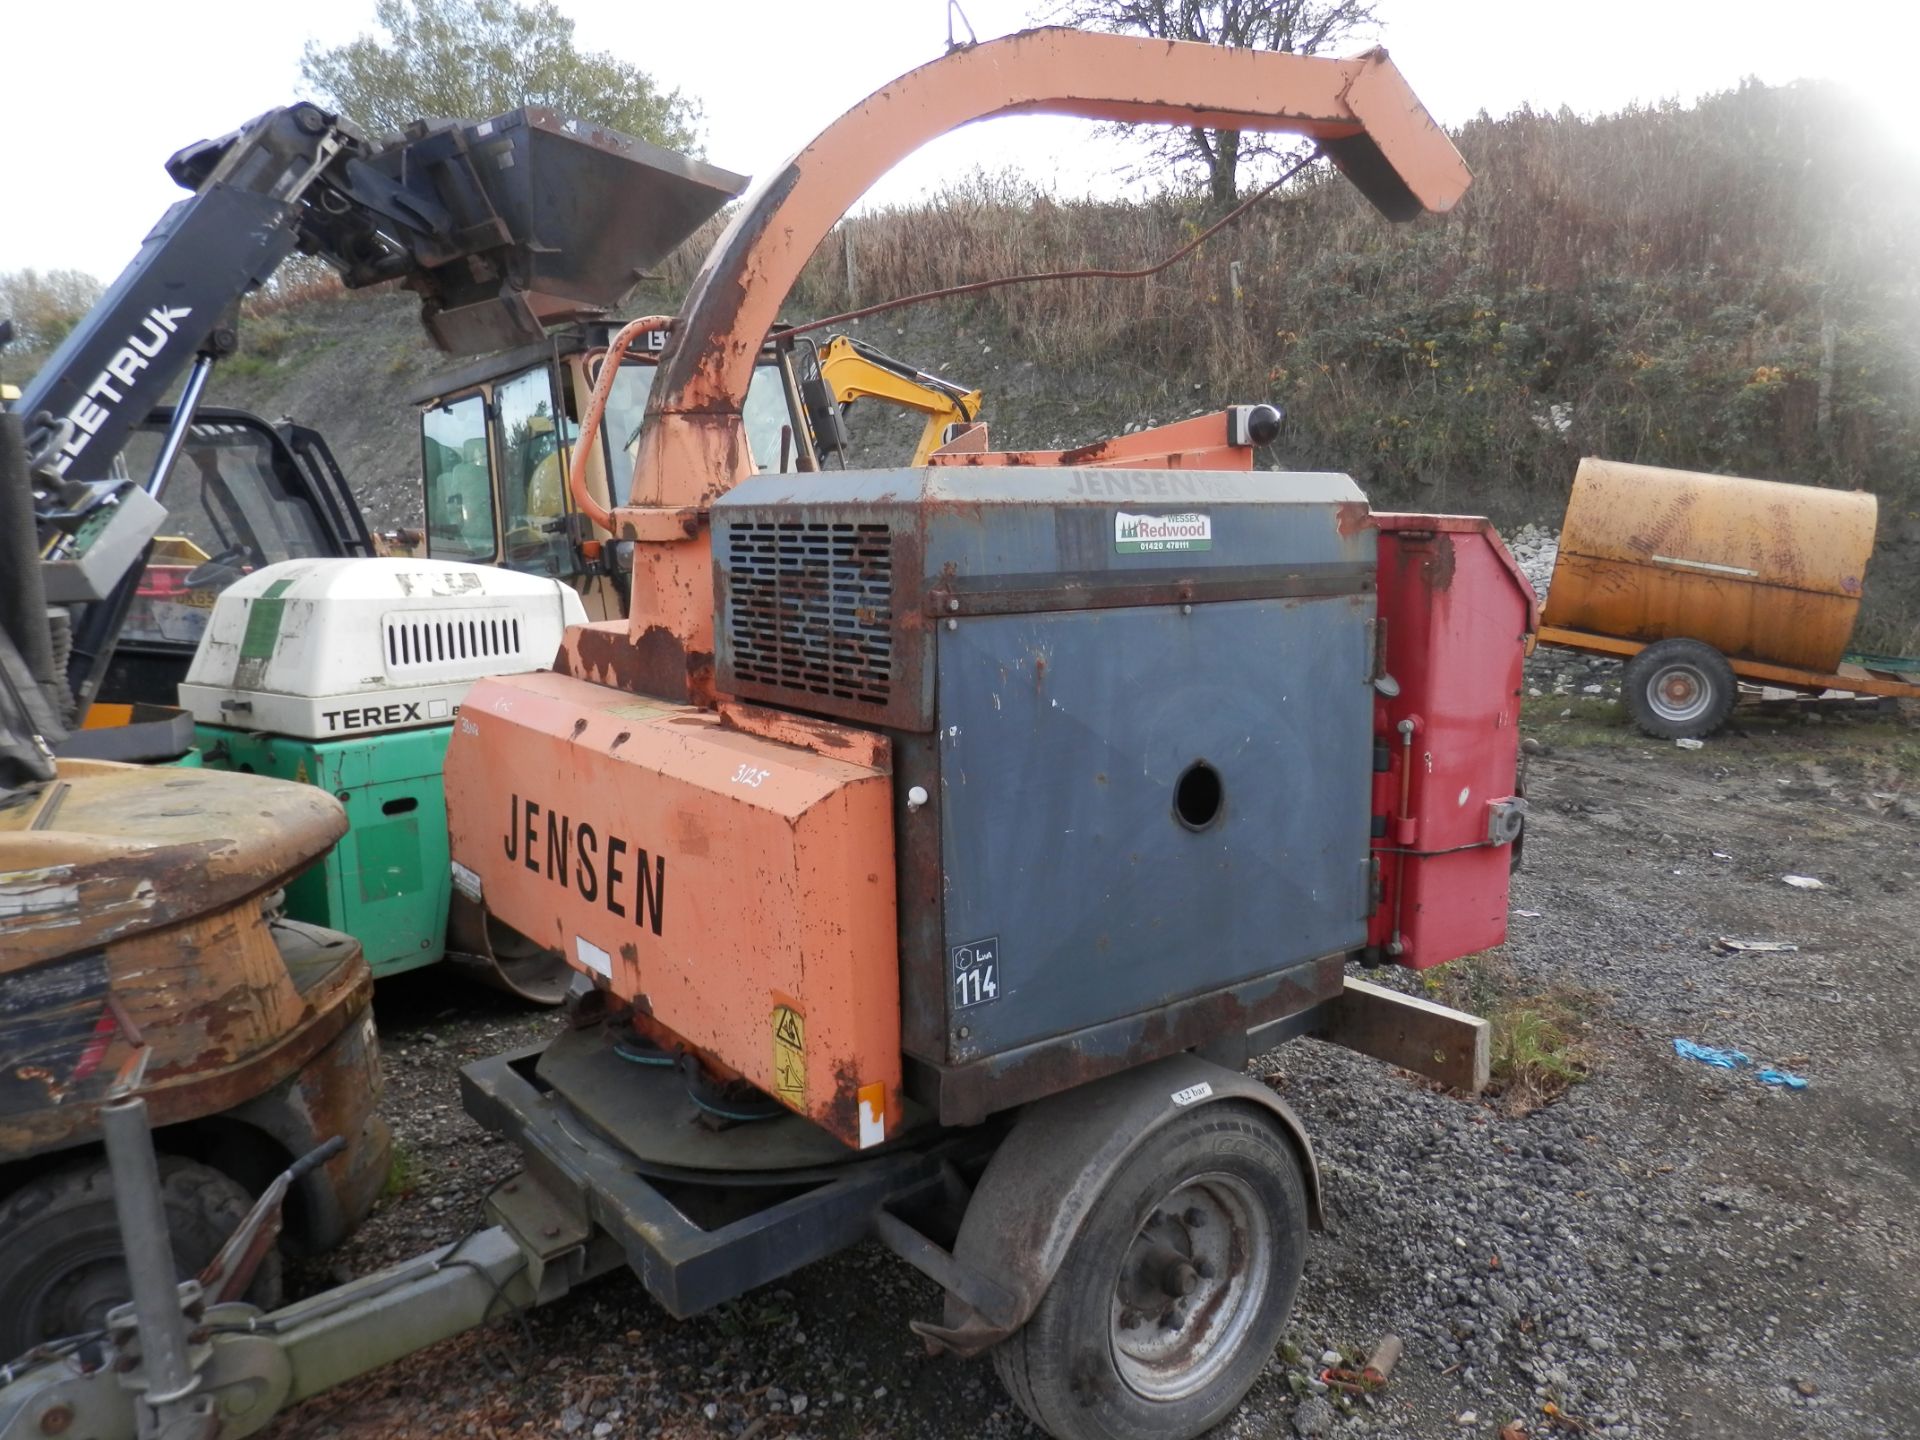 QUALITY 2004 JENSEN DIESEL TURNTABLE CHIPPER, GOOD WORKING ORDER - Image 5 of 9